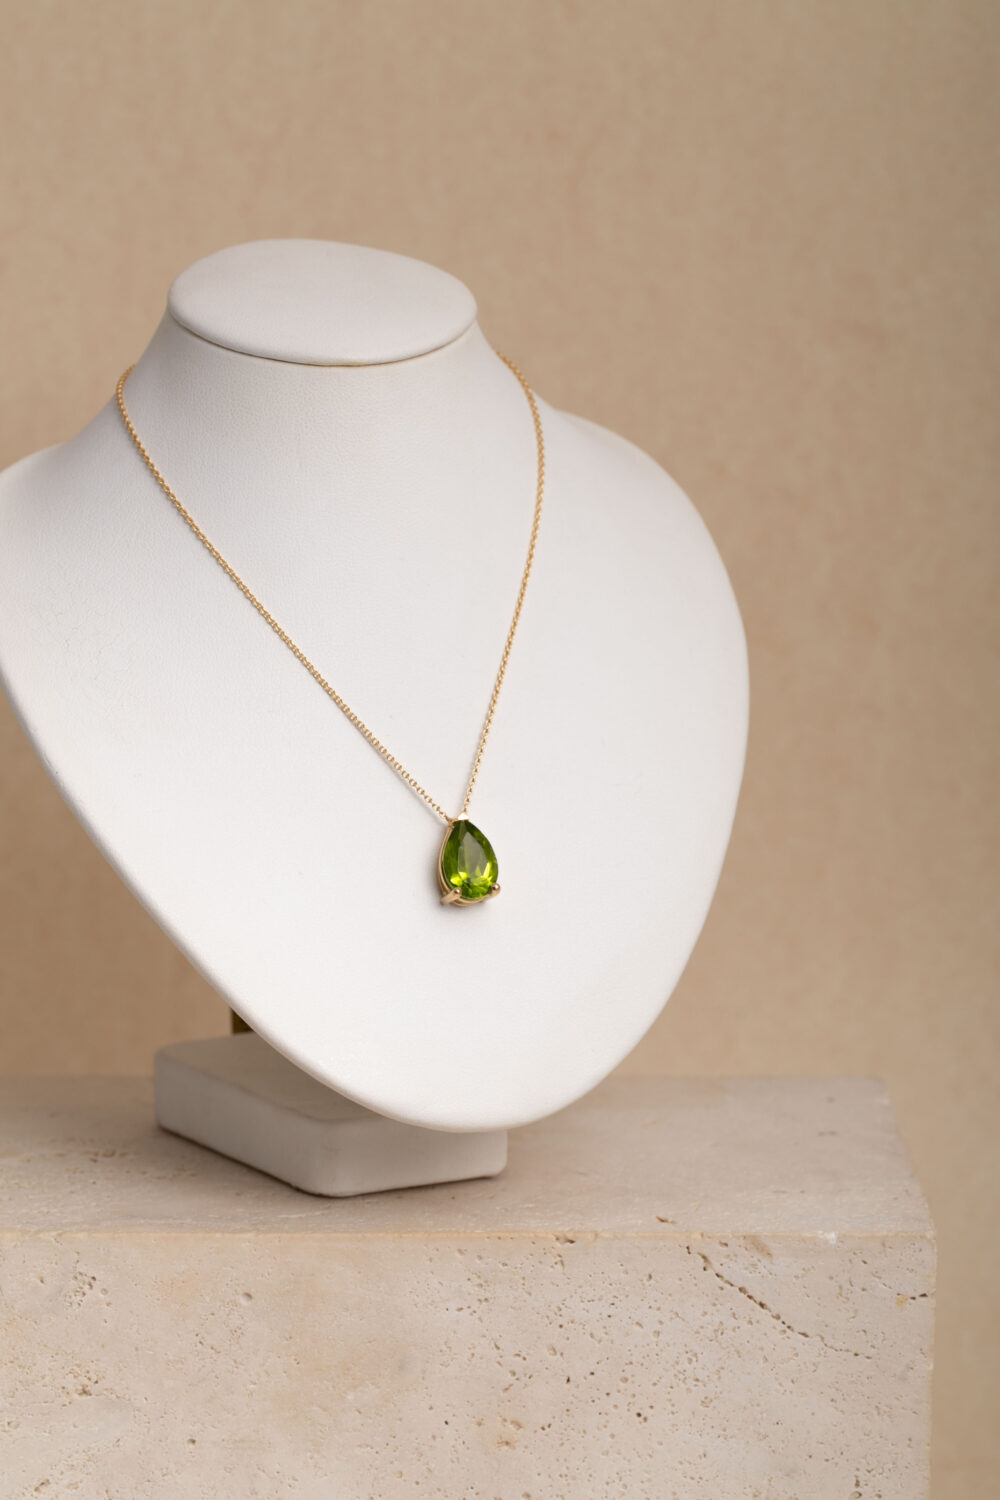 Necklace crafted from 18-karat gold with a pear shaped peridot gemstone hanger.